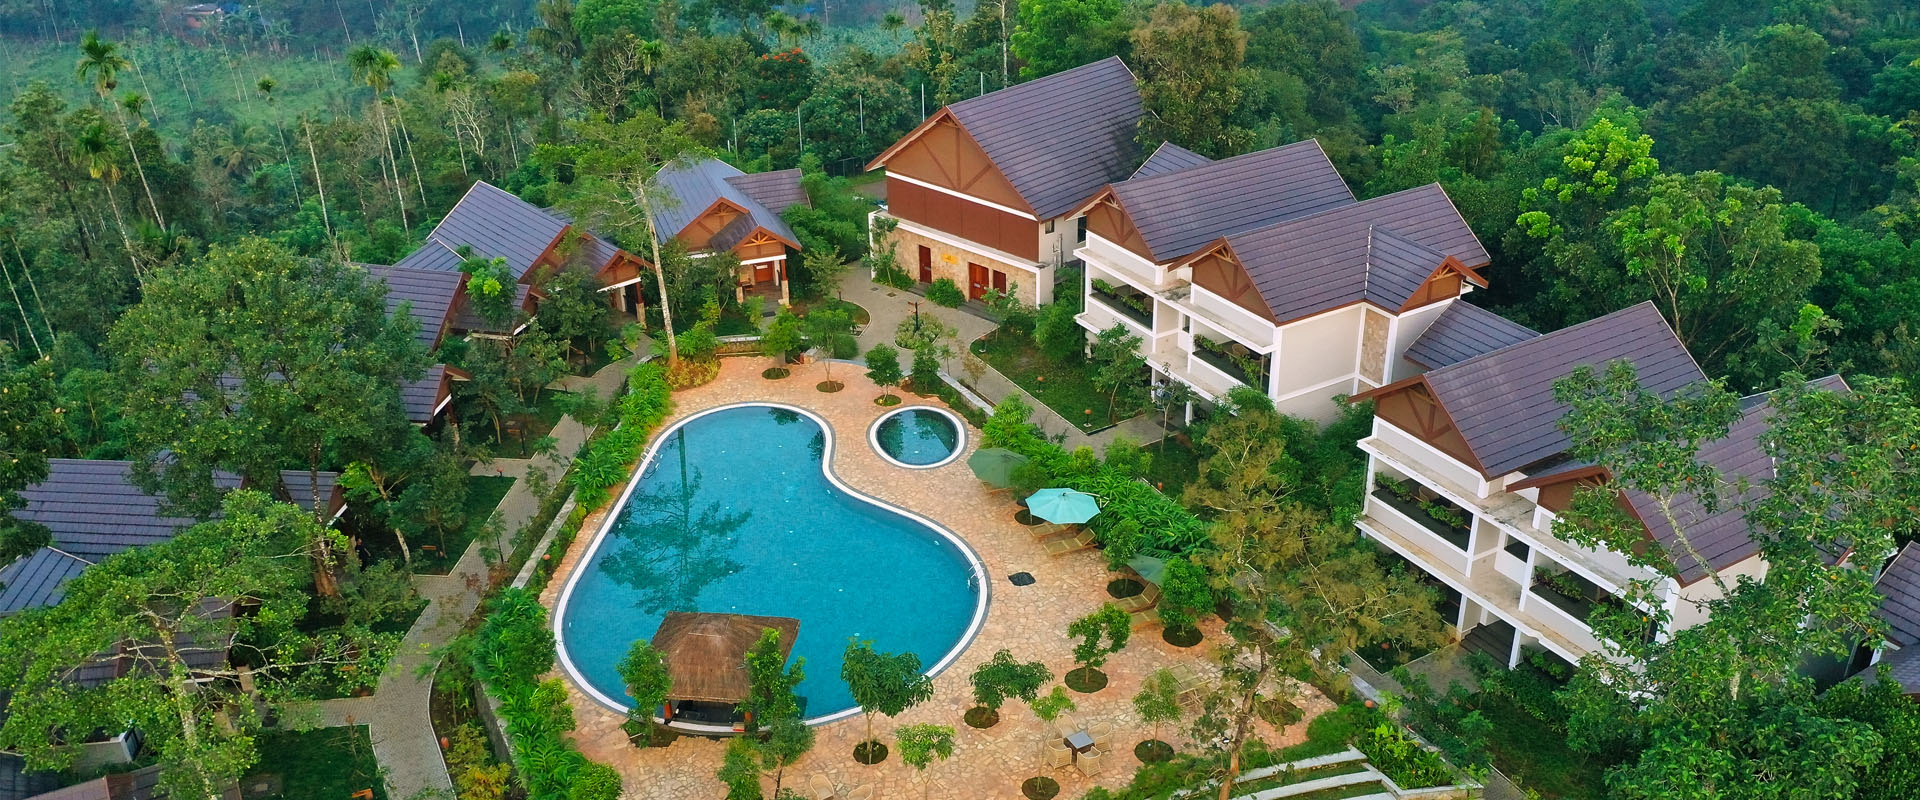 Best Luxurious Family Resort with Pool in Wayanad